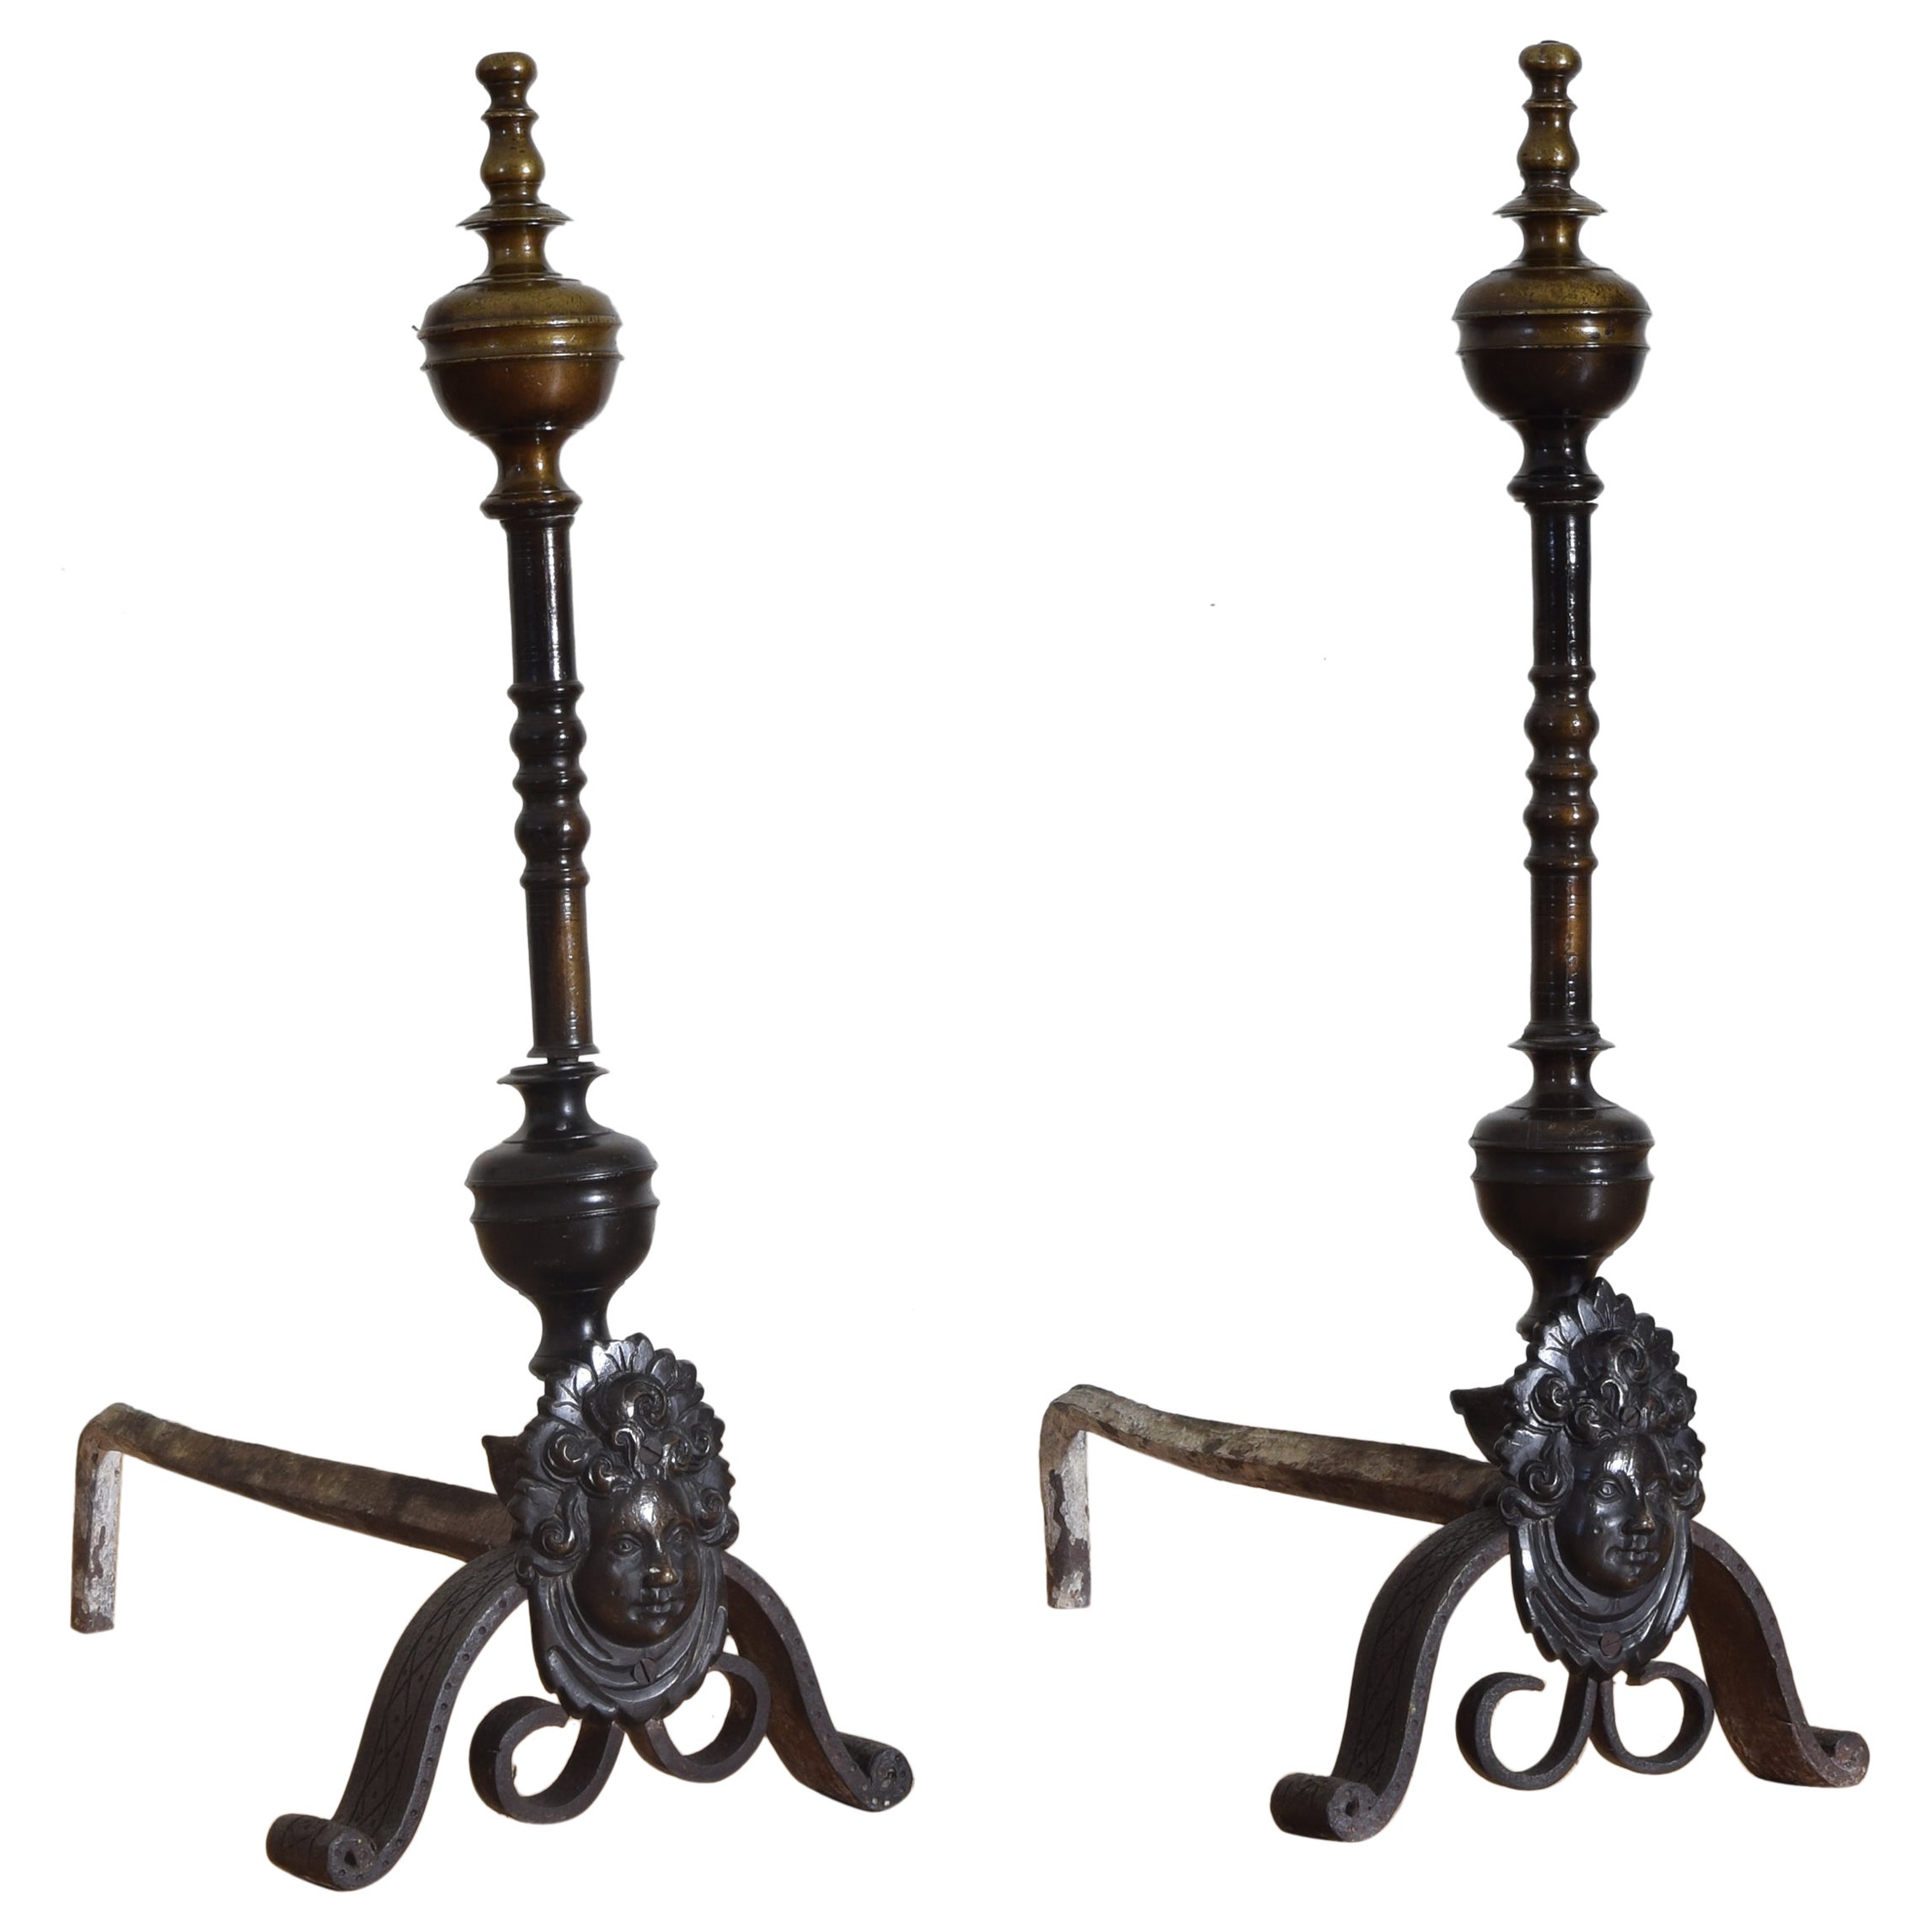 Pair French Louis XIV Period Brass & Wrought Iron Andirons, early 18th century For Sale